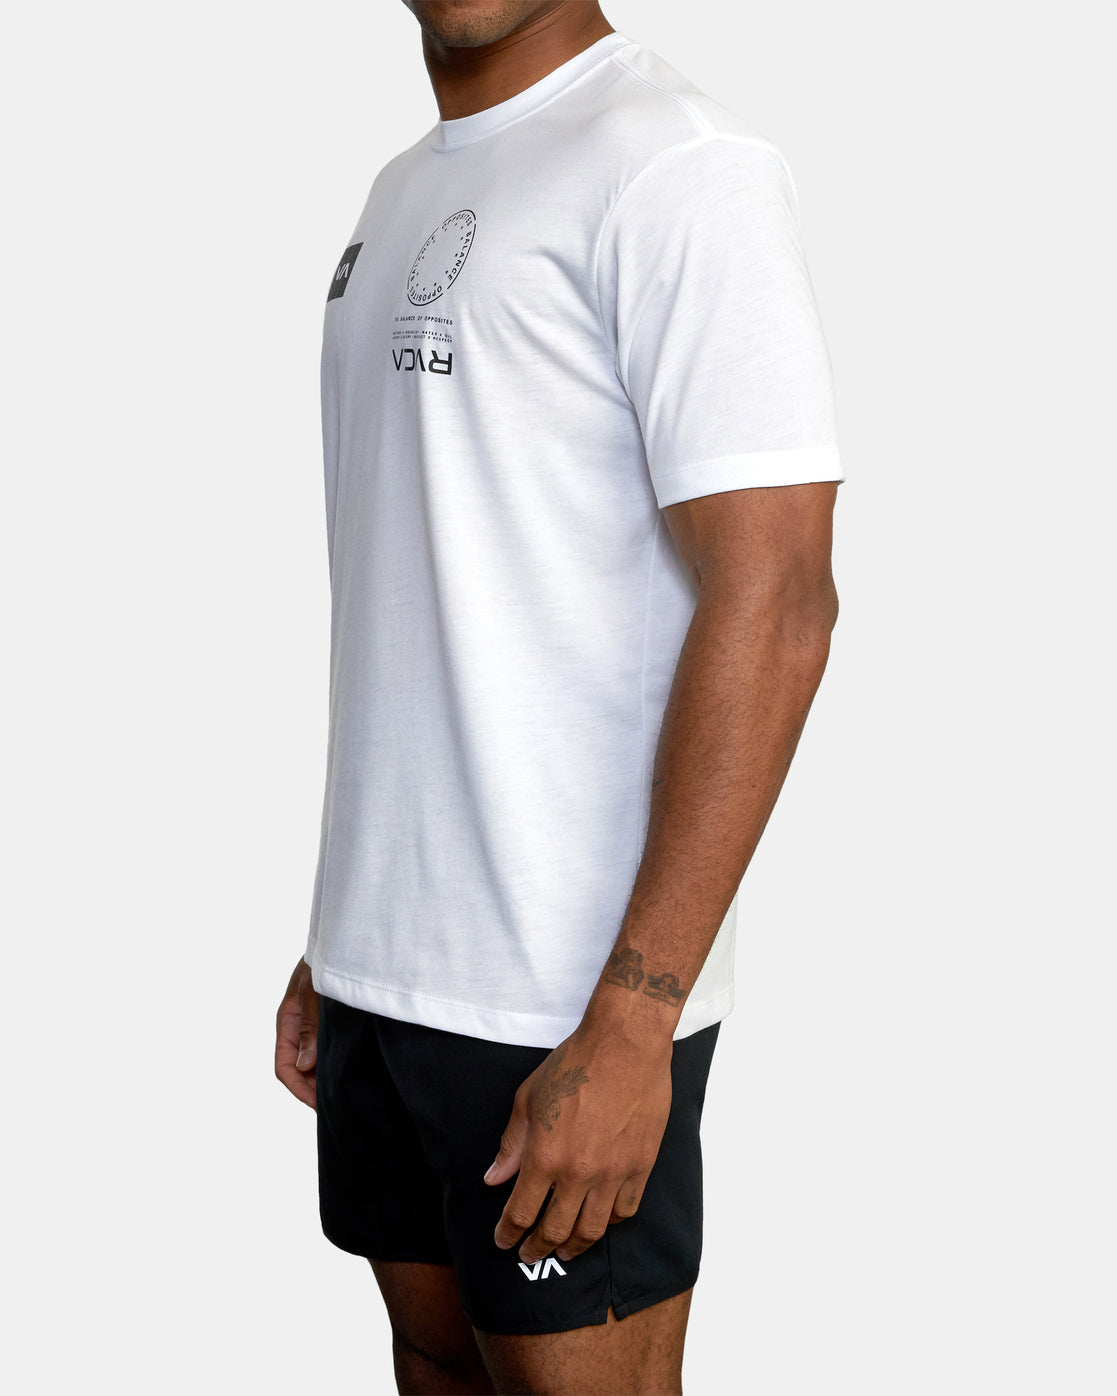 VA MARK SS RVCA WHITE MENS T-SHIRTS CREW NECK REGULAR FIT LIGHT WEIGHT SCREEN PRINTED FRONT AND BACK